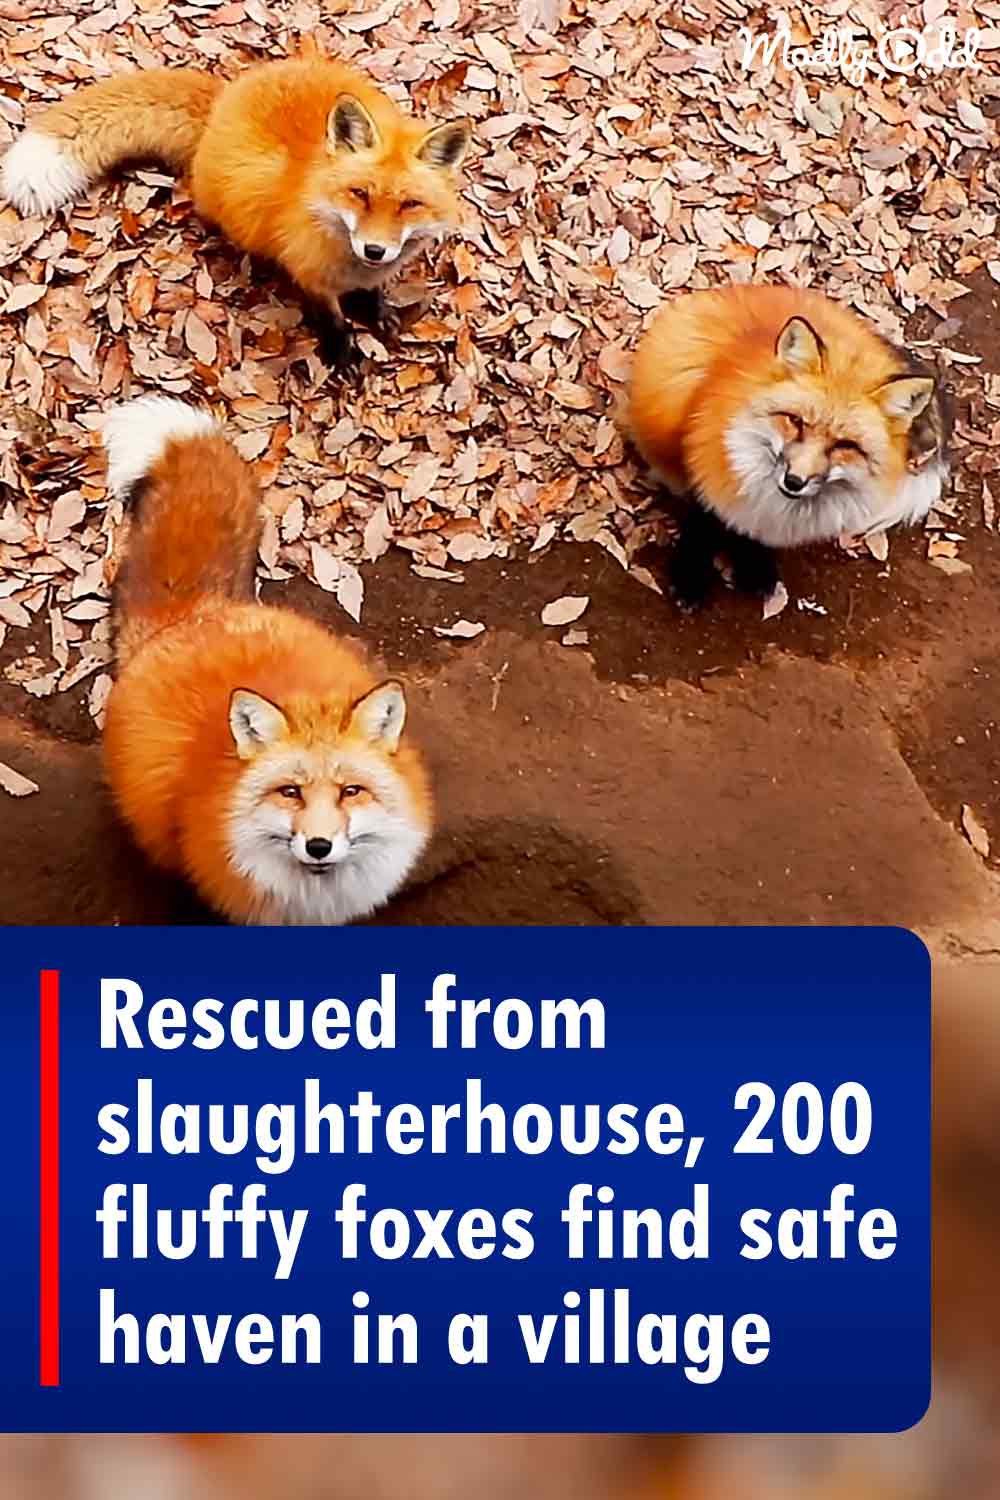 Rescued from slaughterhouse, 200 fluffy foxes find safe haven in a village